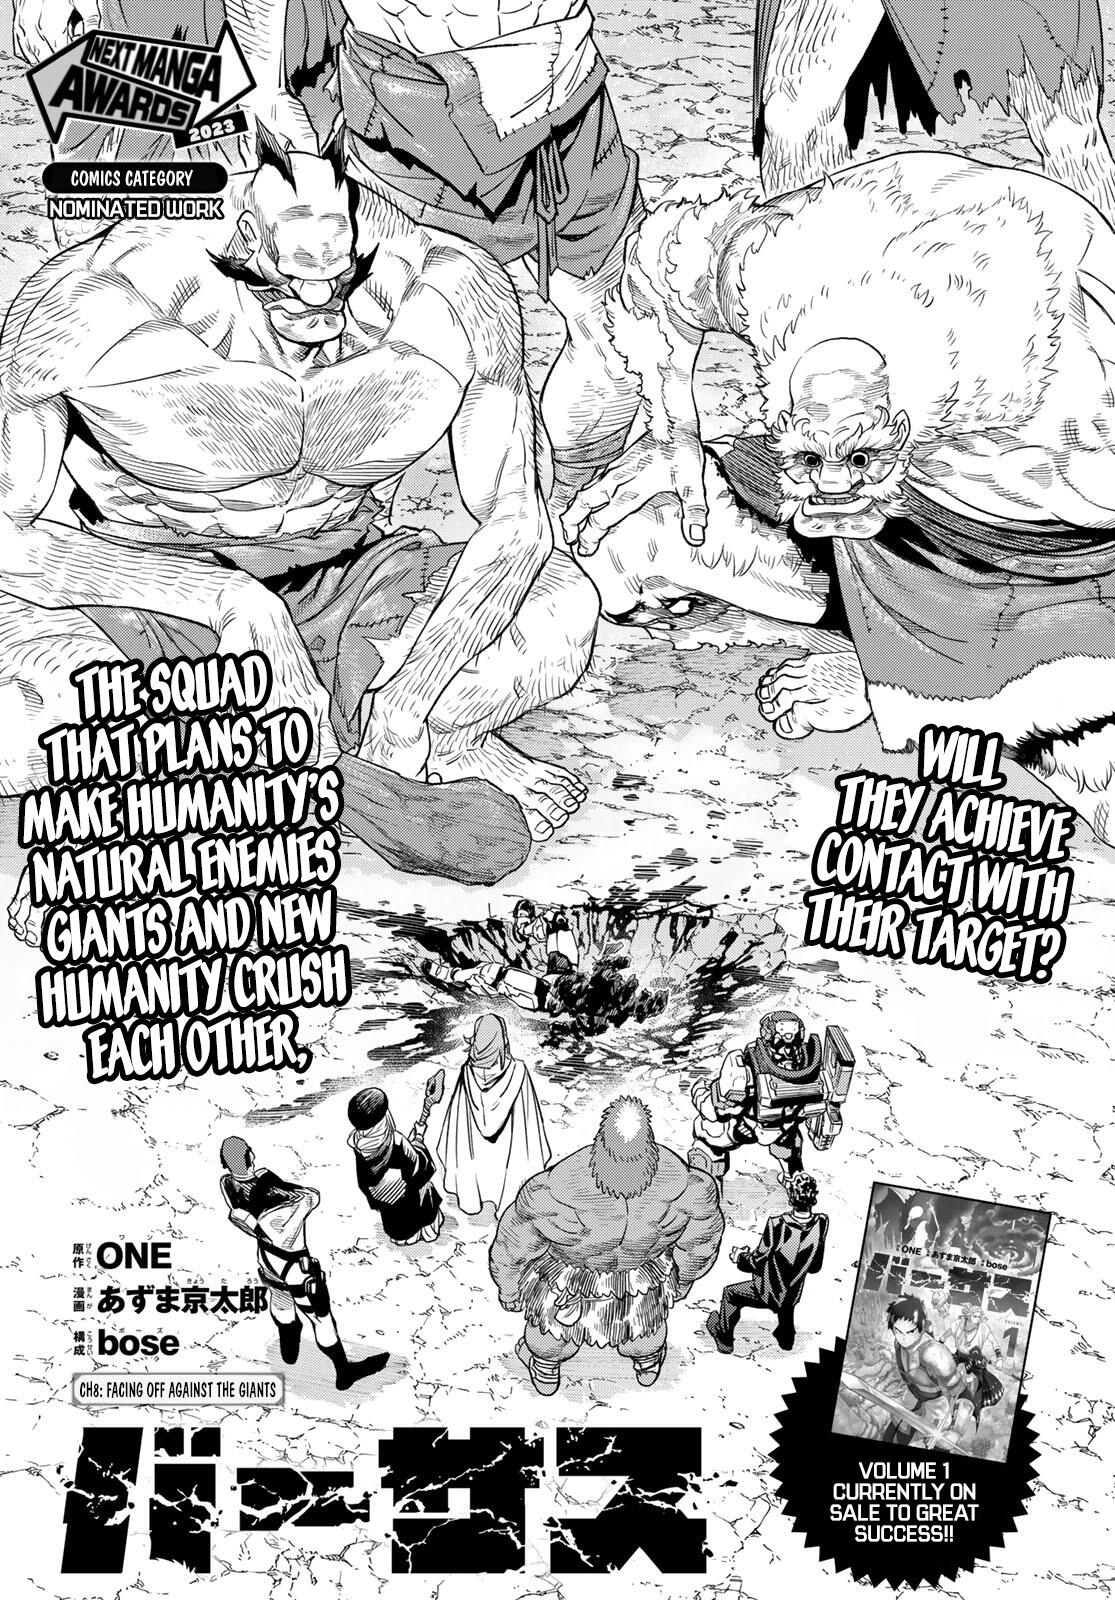 Two giants face-to-face. - Chapter 5, Page 116 - DBMultiverse